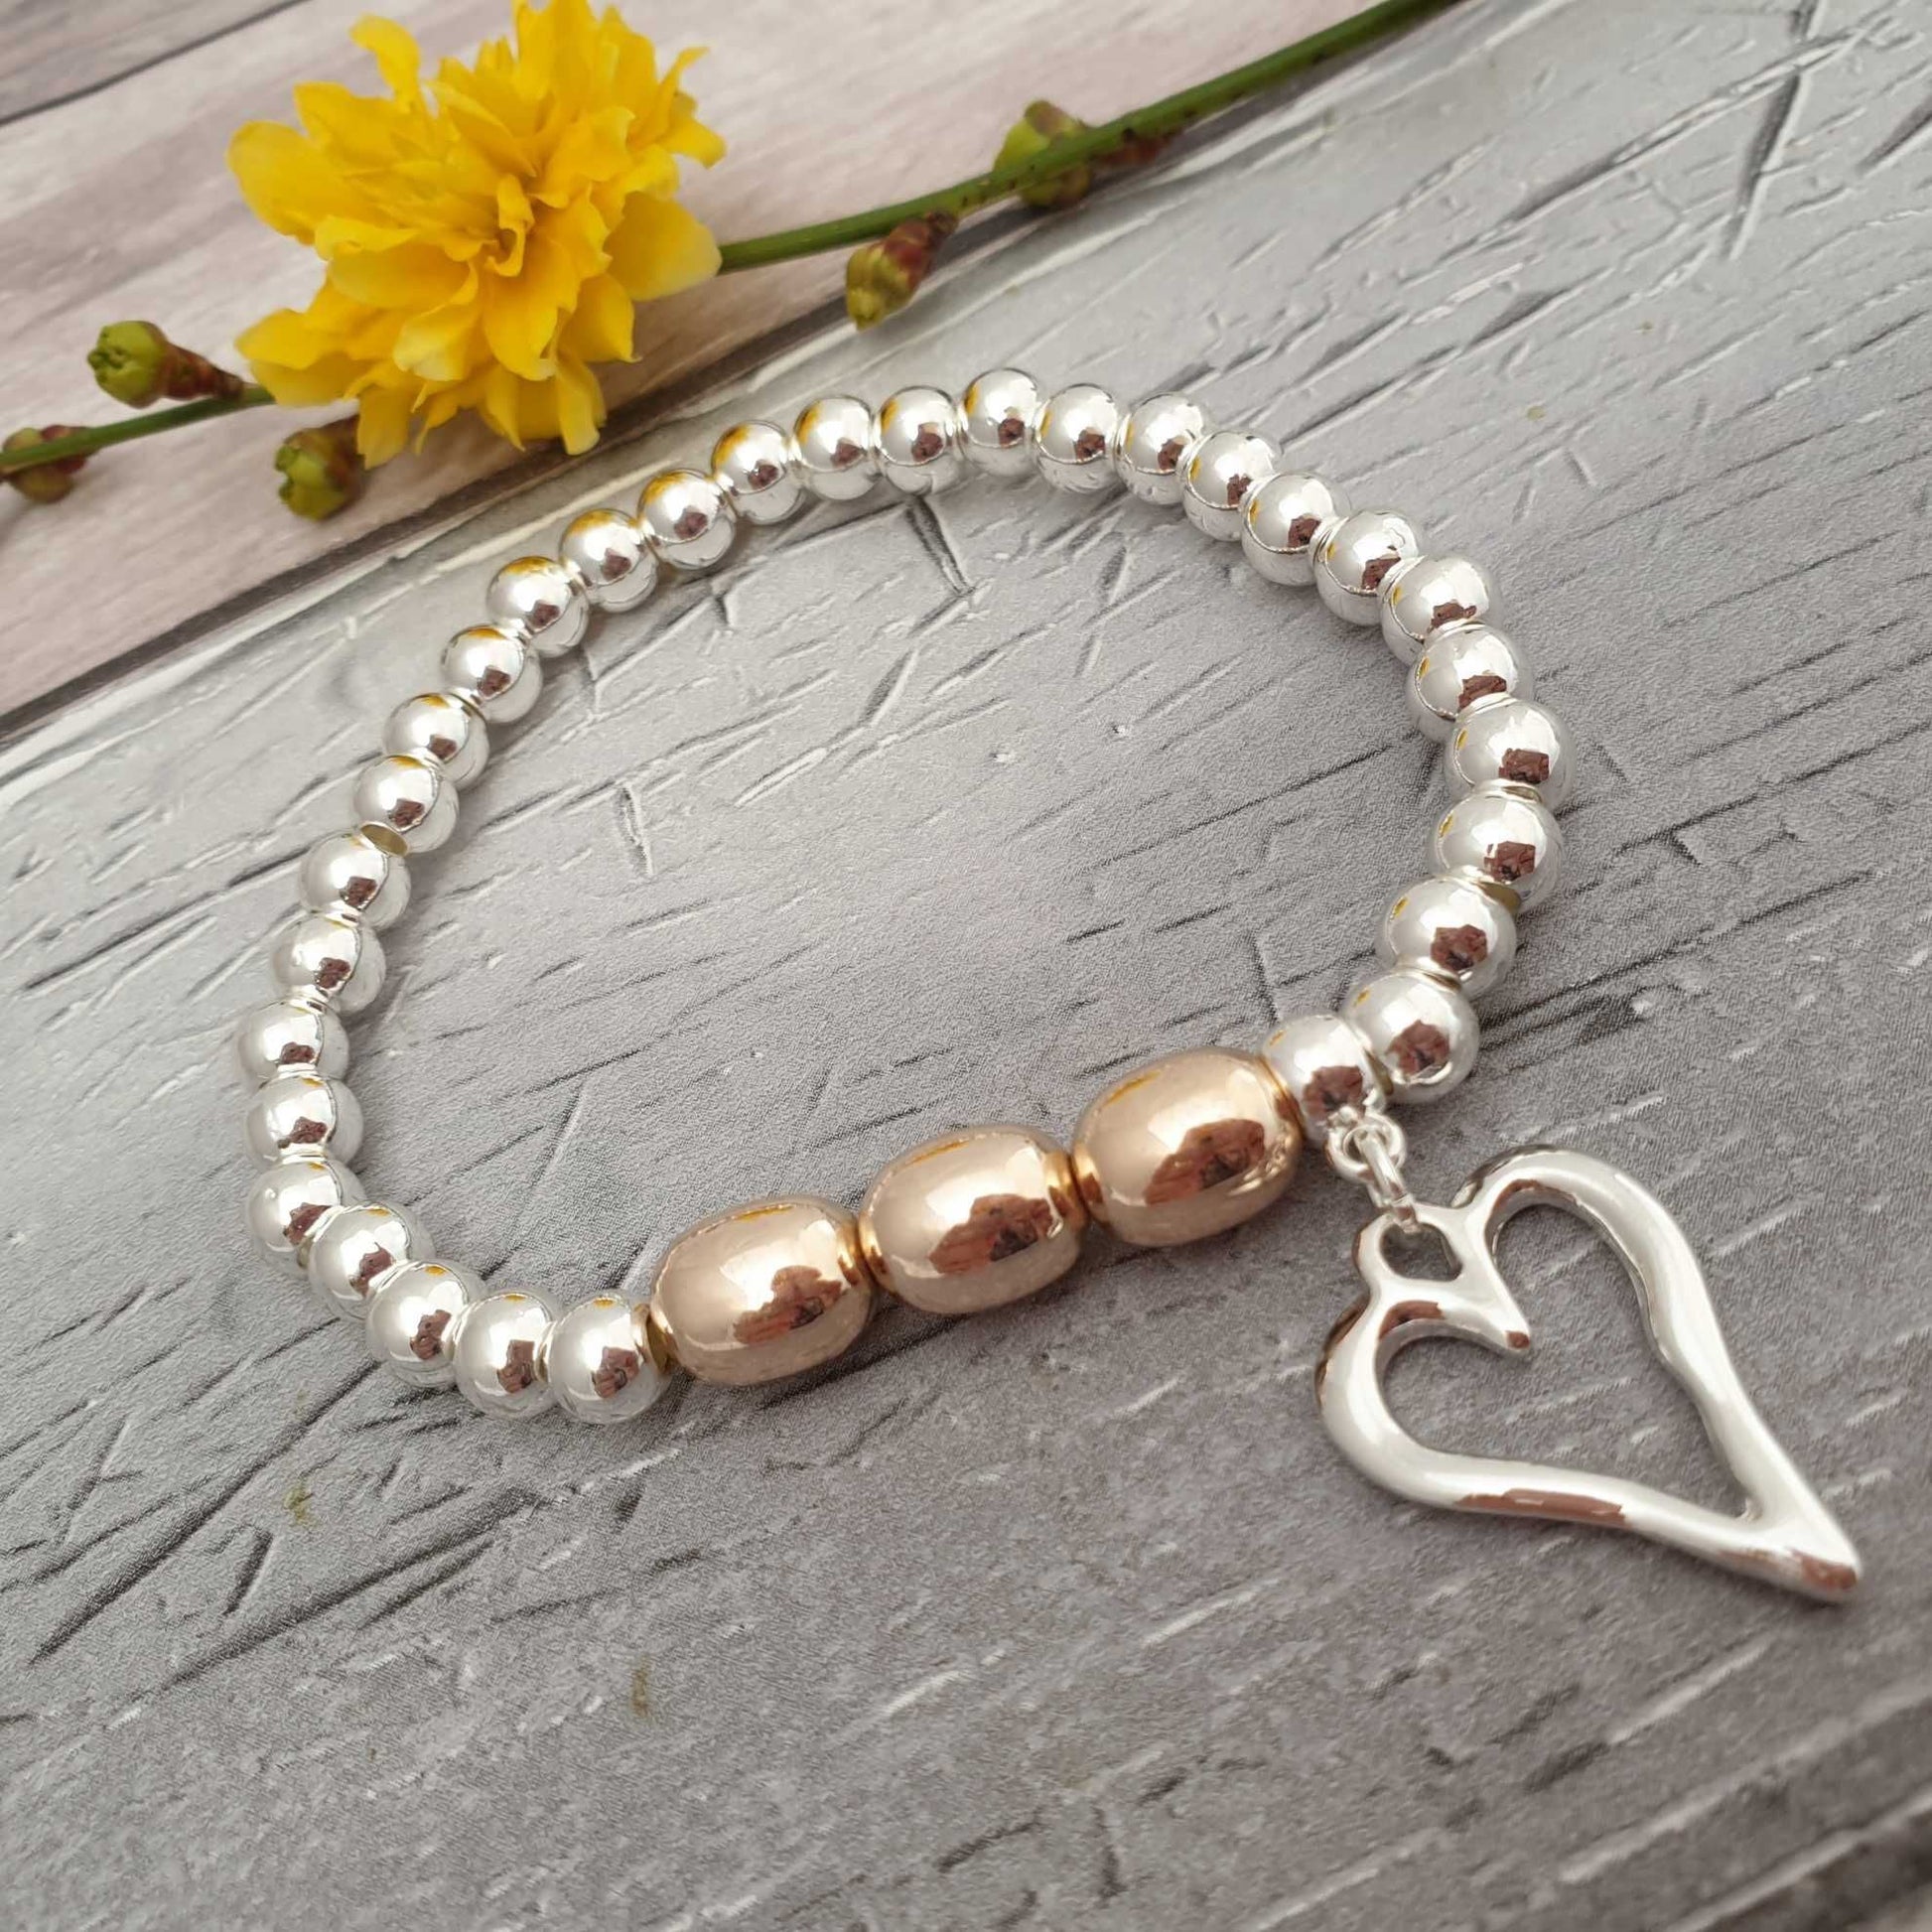 Photo of a silver bracelet with love heart charm